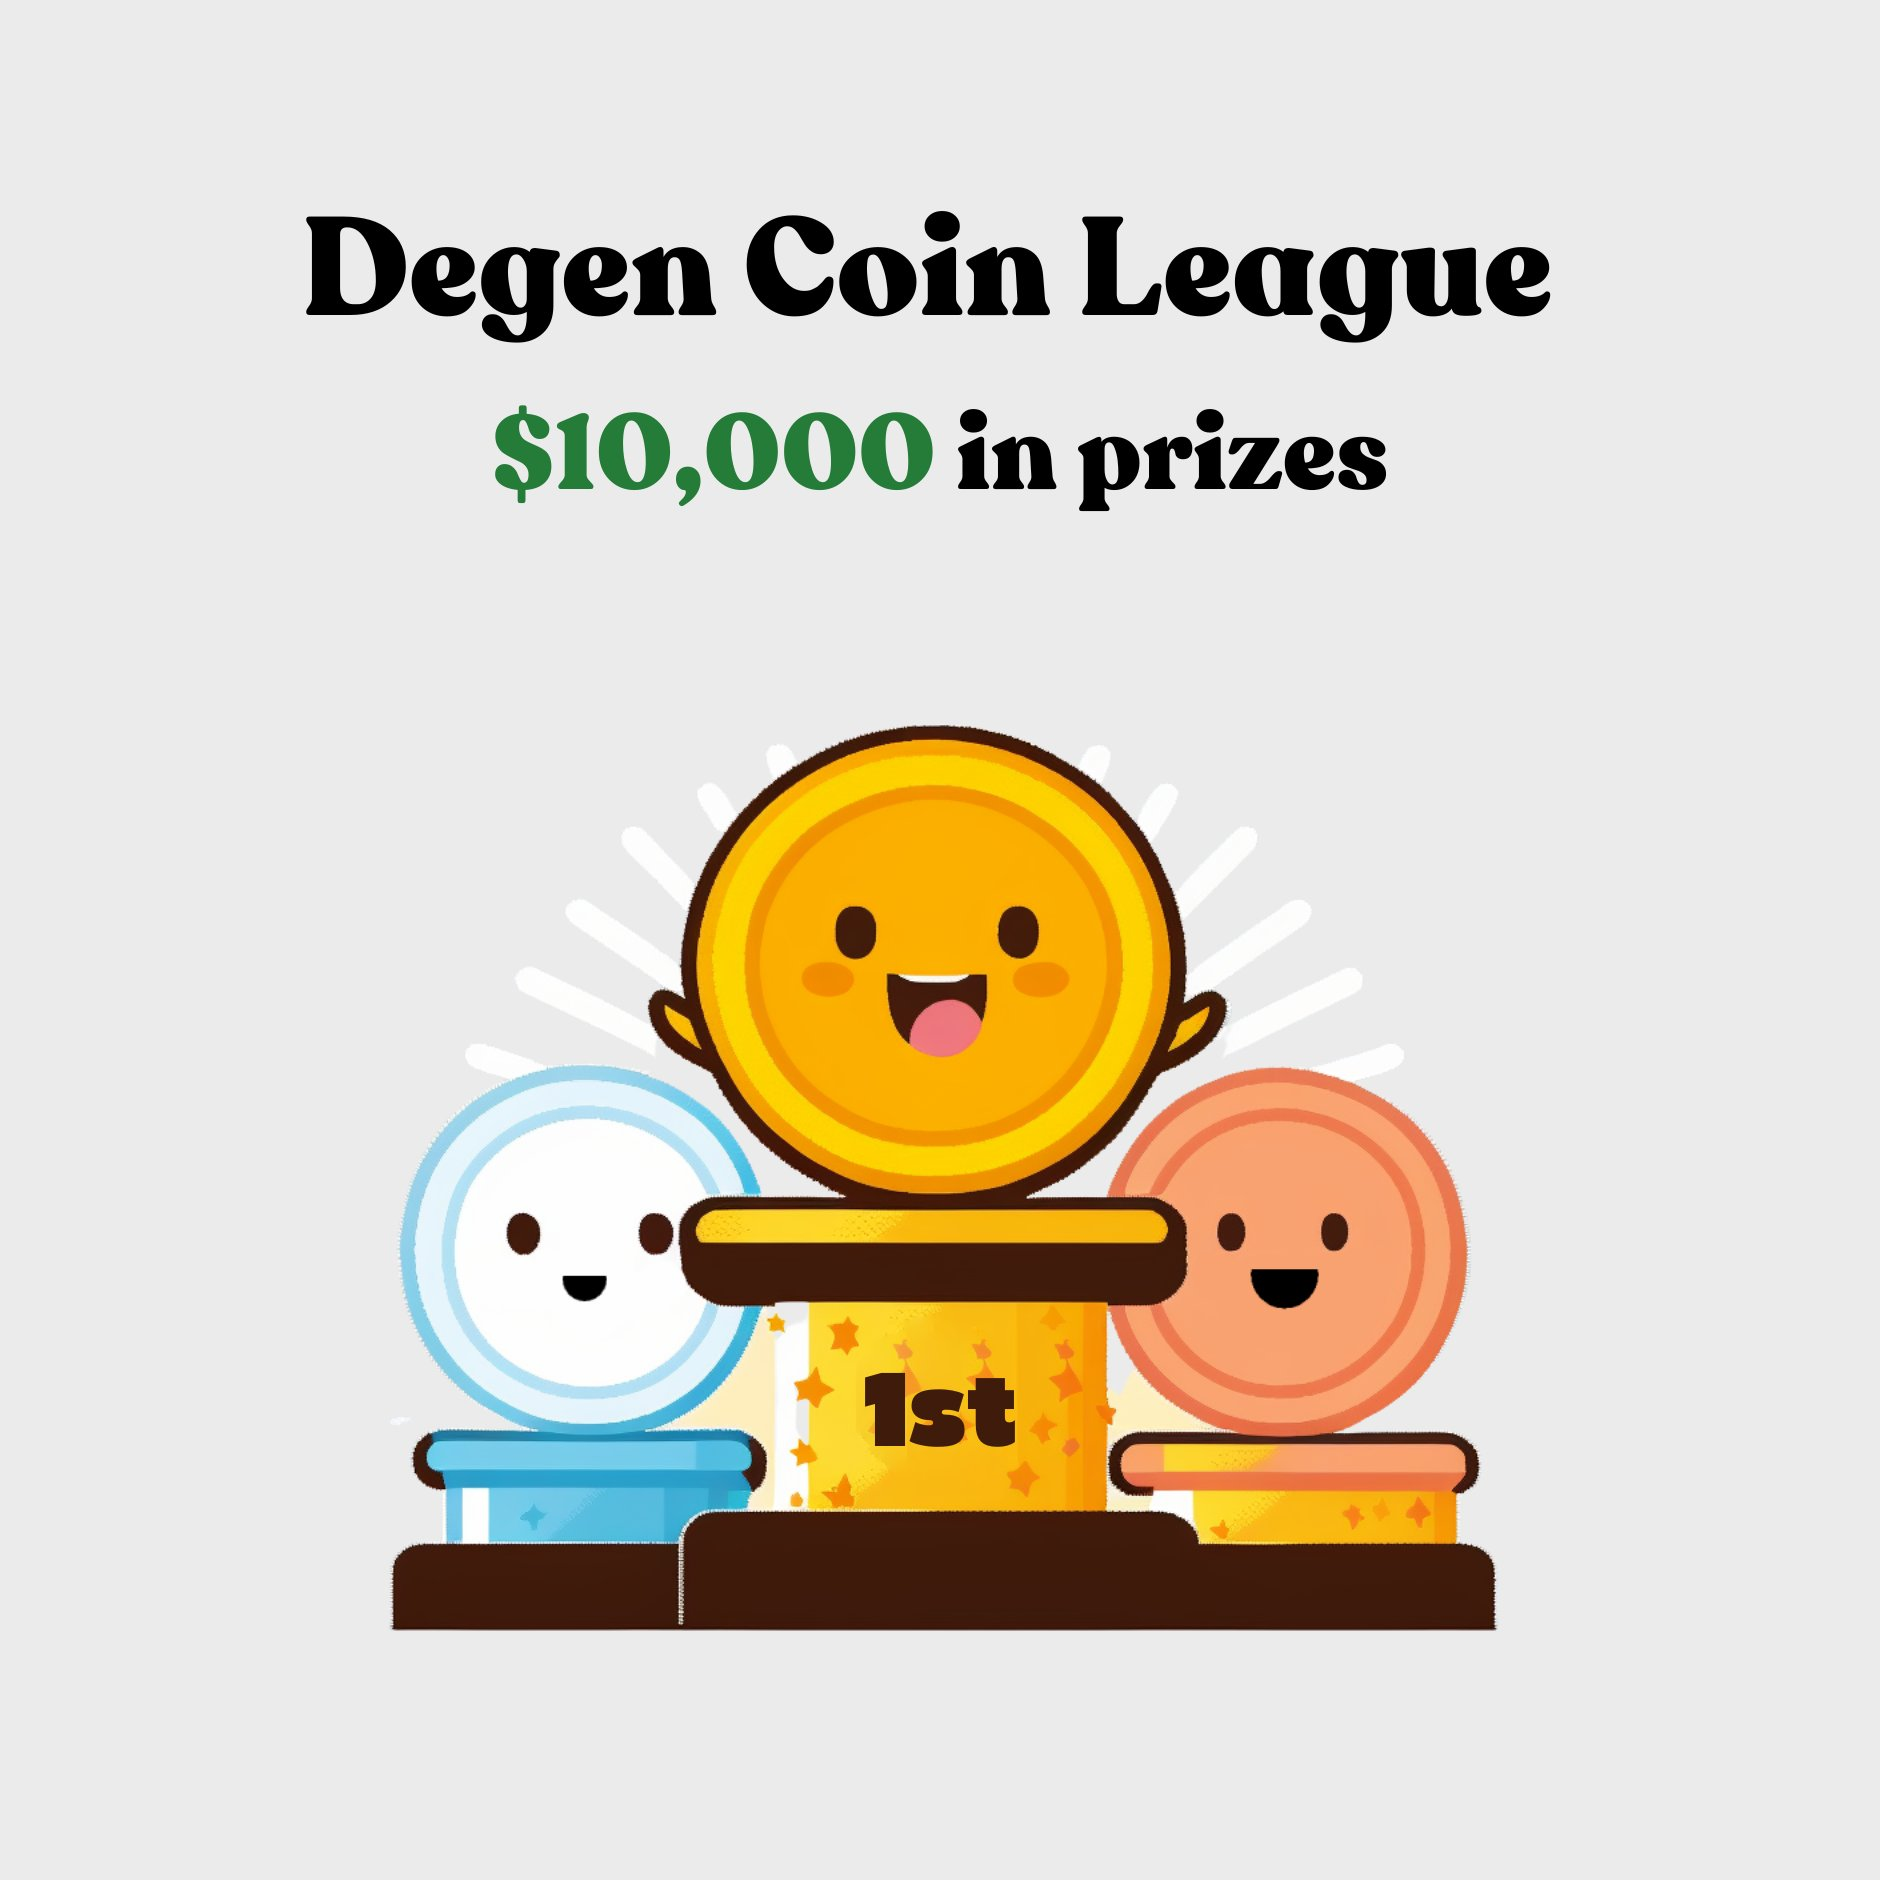 @jeffjagoe/the-dcf-team-is-launching-degen-coin-league-with-dollar10000-in-prizes